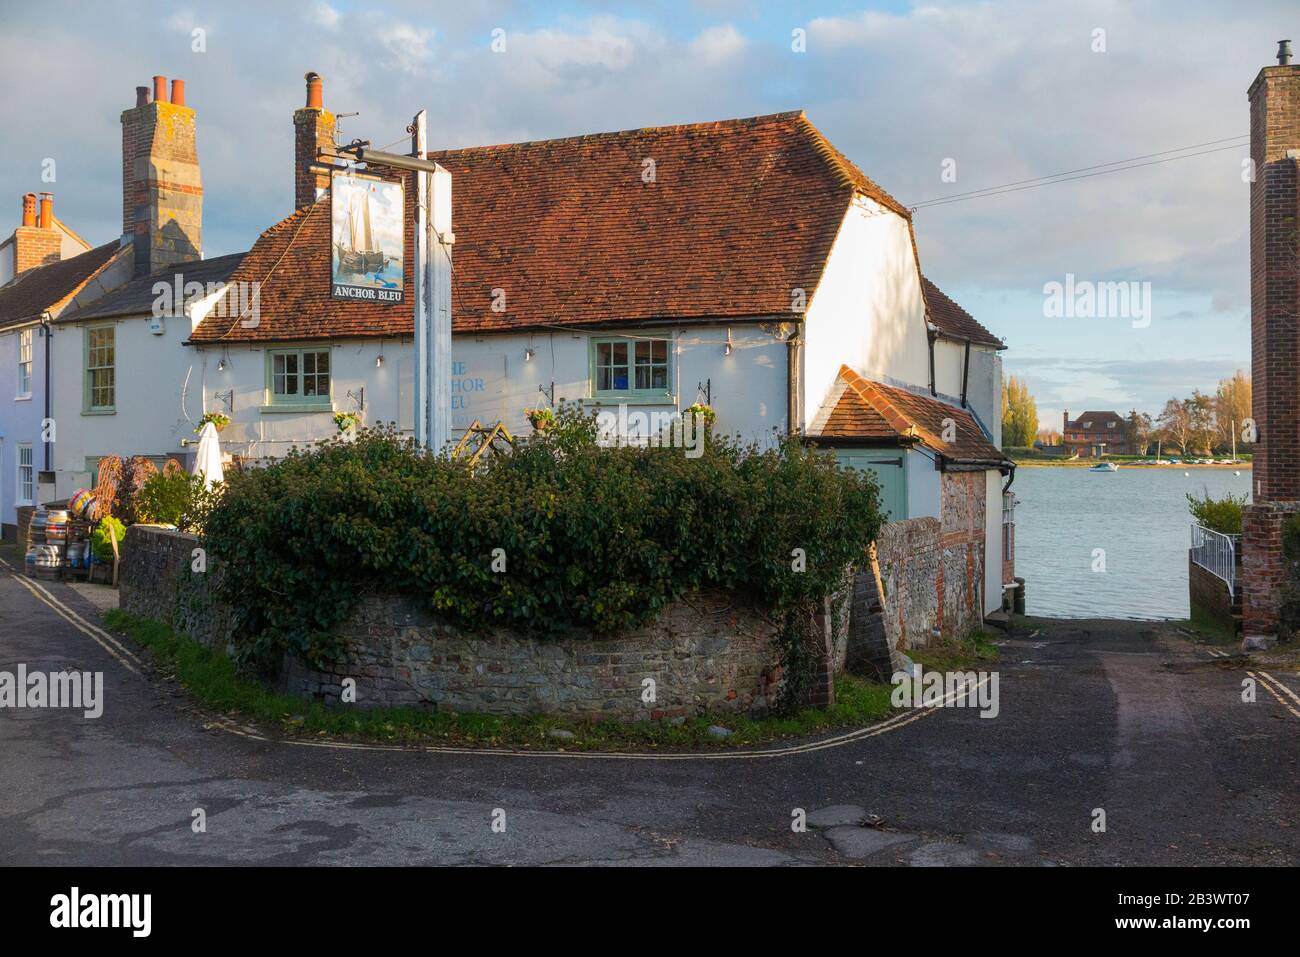 Seen from the outside, the Anchor Bleu – English; The Blue Anchor – pub / public house with sign on the High Street, Bosham, Chichester PO18 8LS. West Sussex. UK (114) Stock Photo